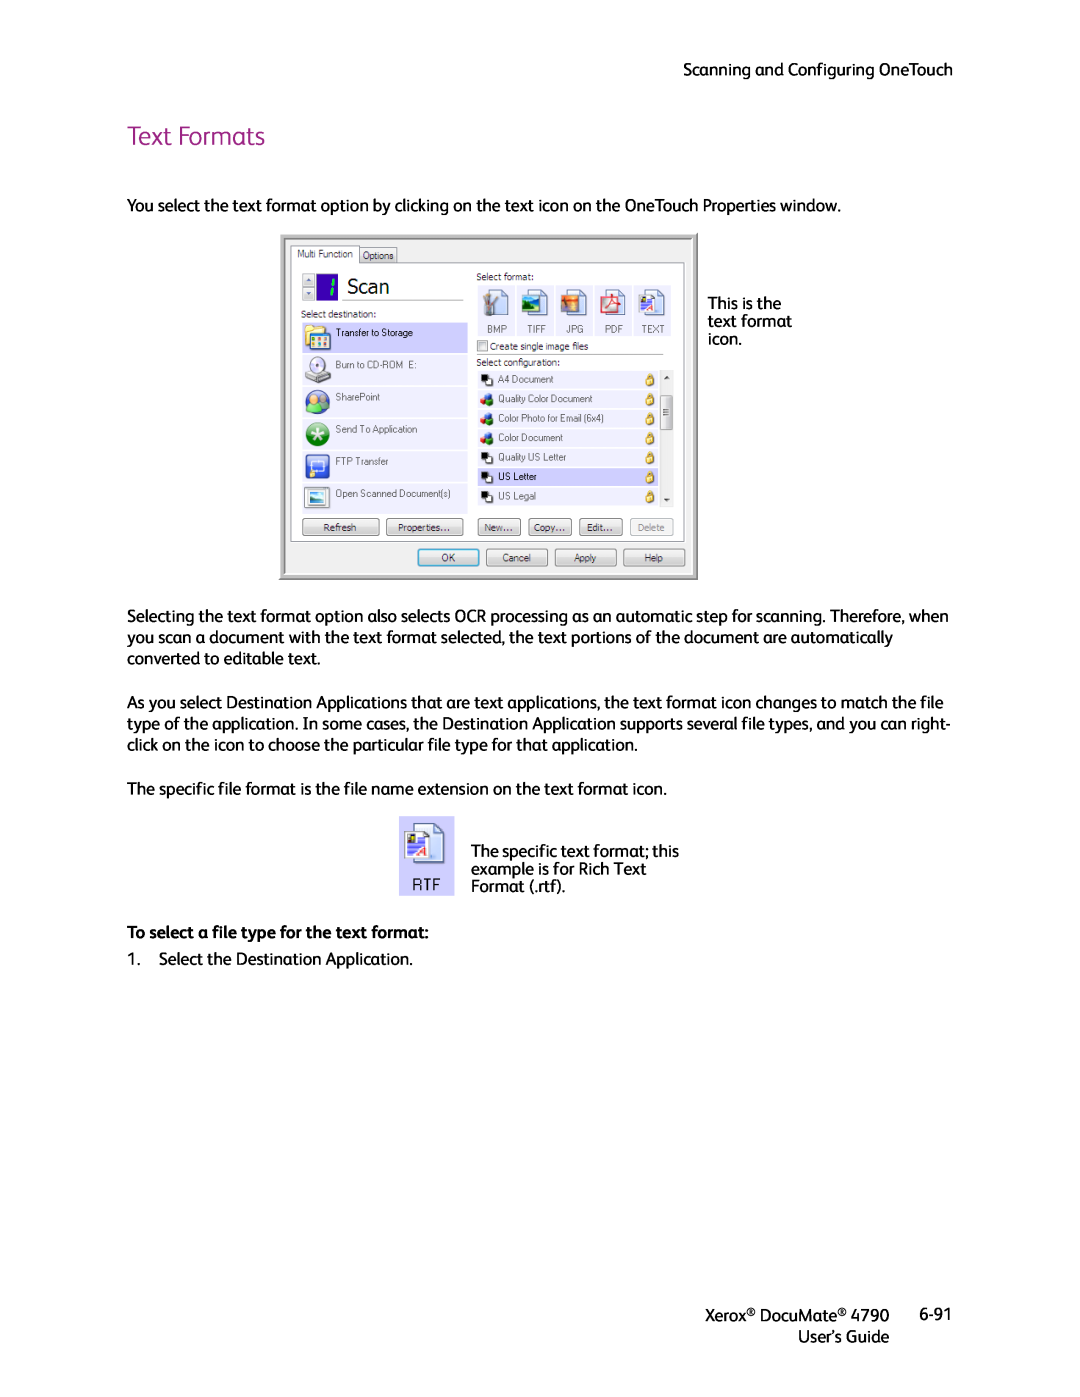 Xerox xerox documate manual Text Formats, To select a file type for the text format 